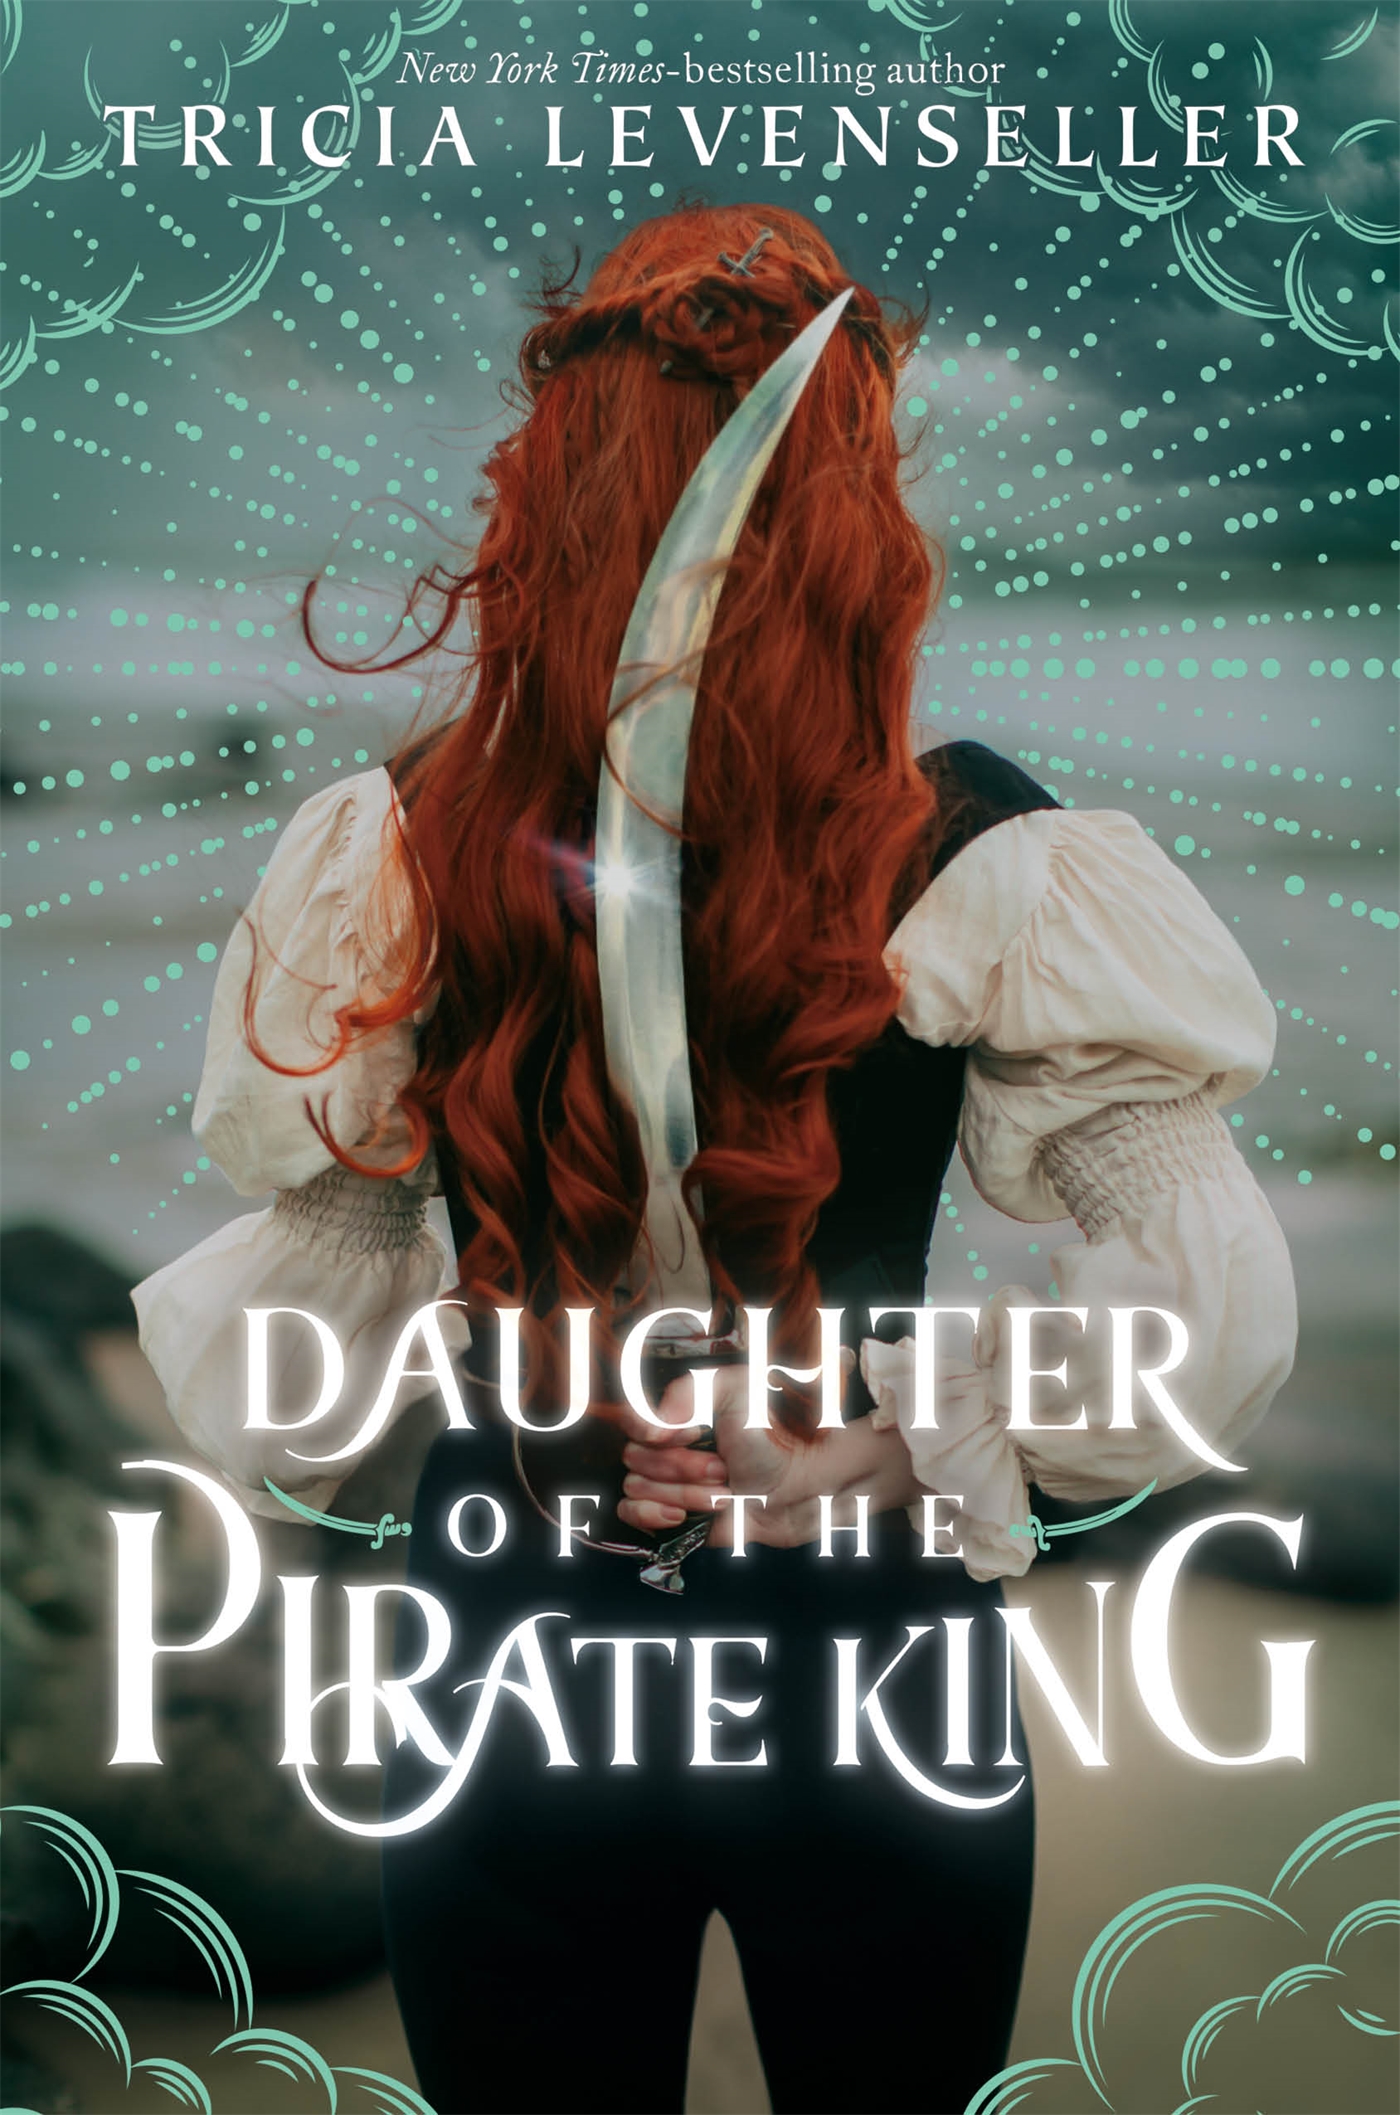 Book Daughter of the Pirate King